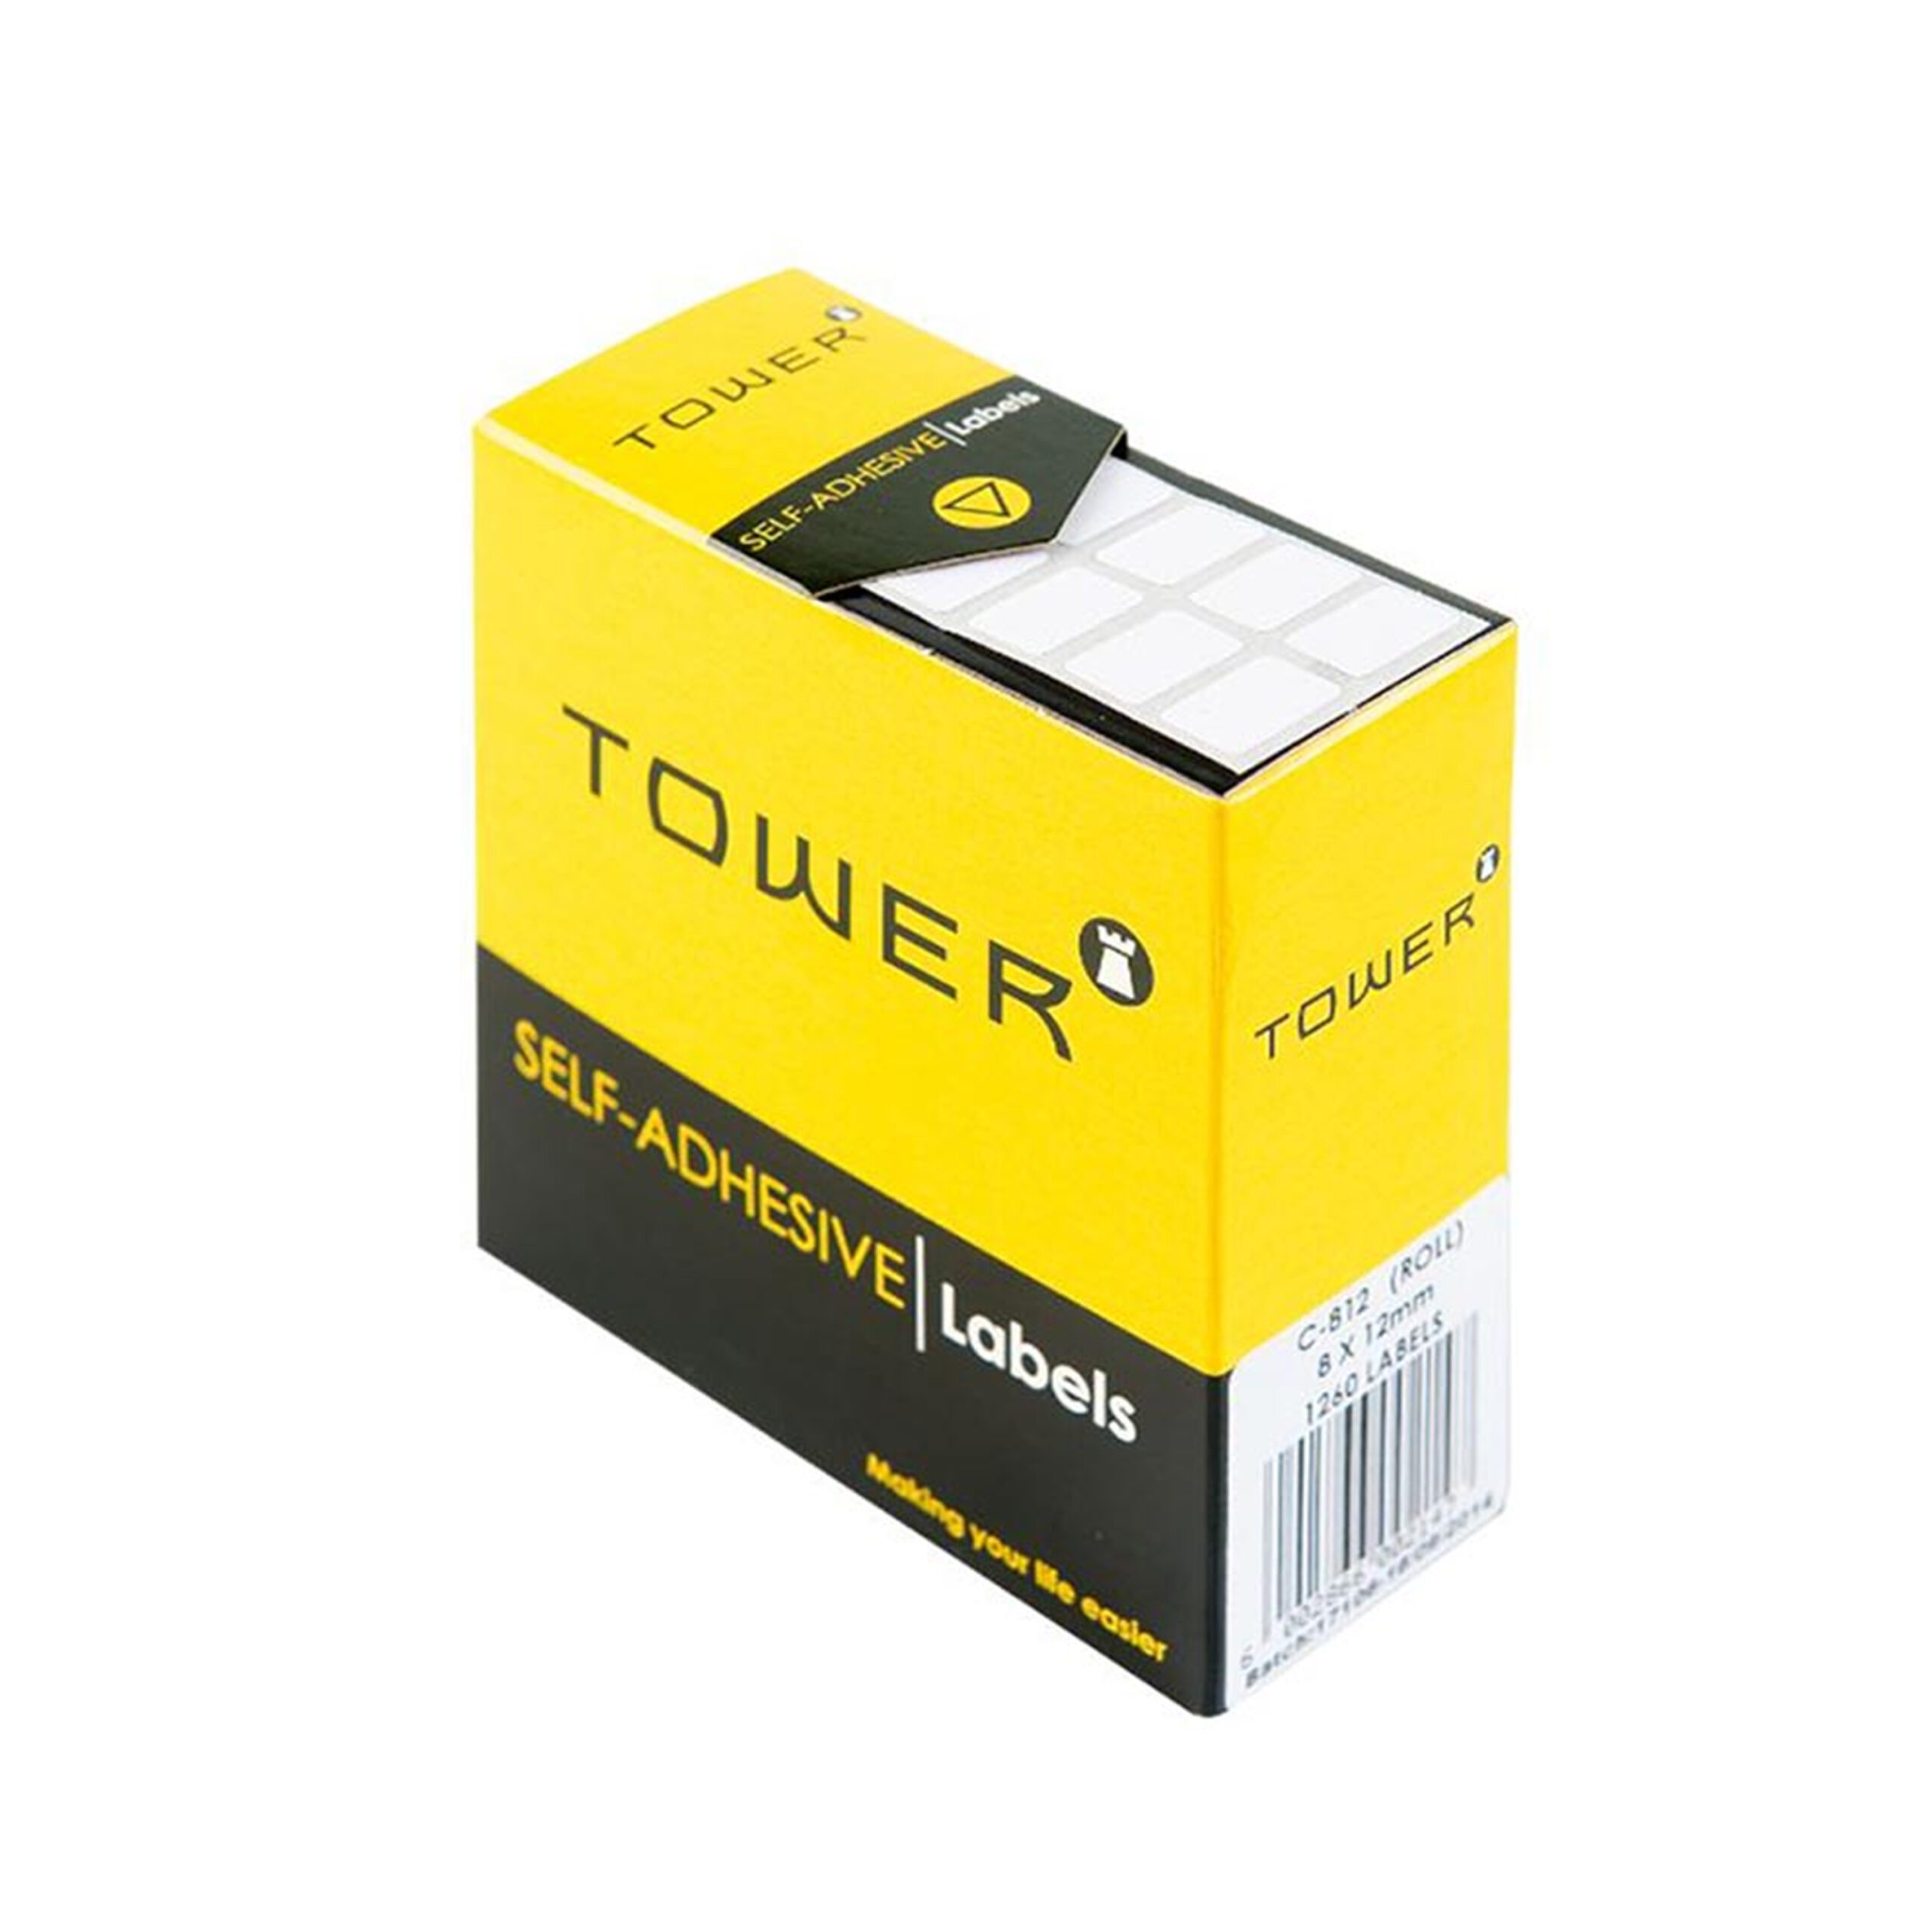 TOWER  SELF
ADHESIVE WHITE
LABELS  8x12mm 
(1260 LABELS)